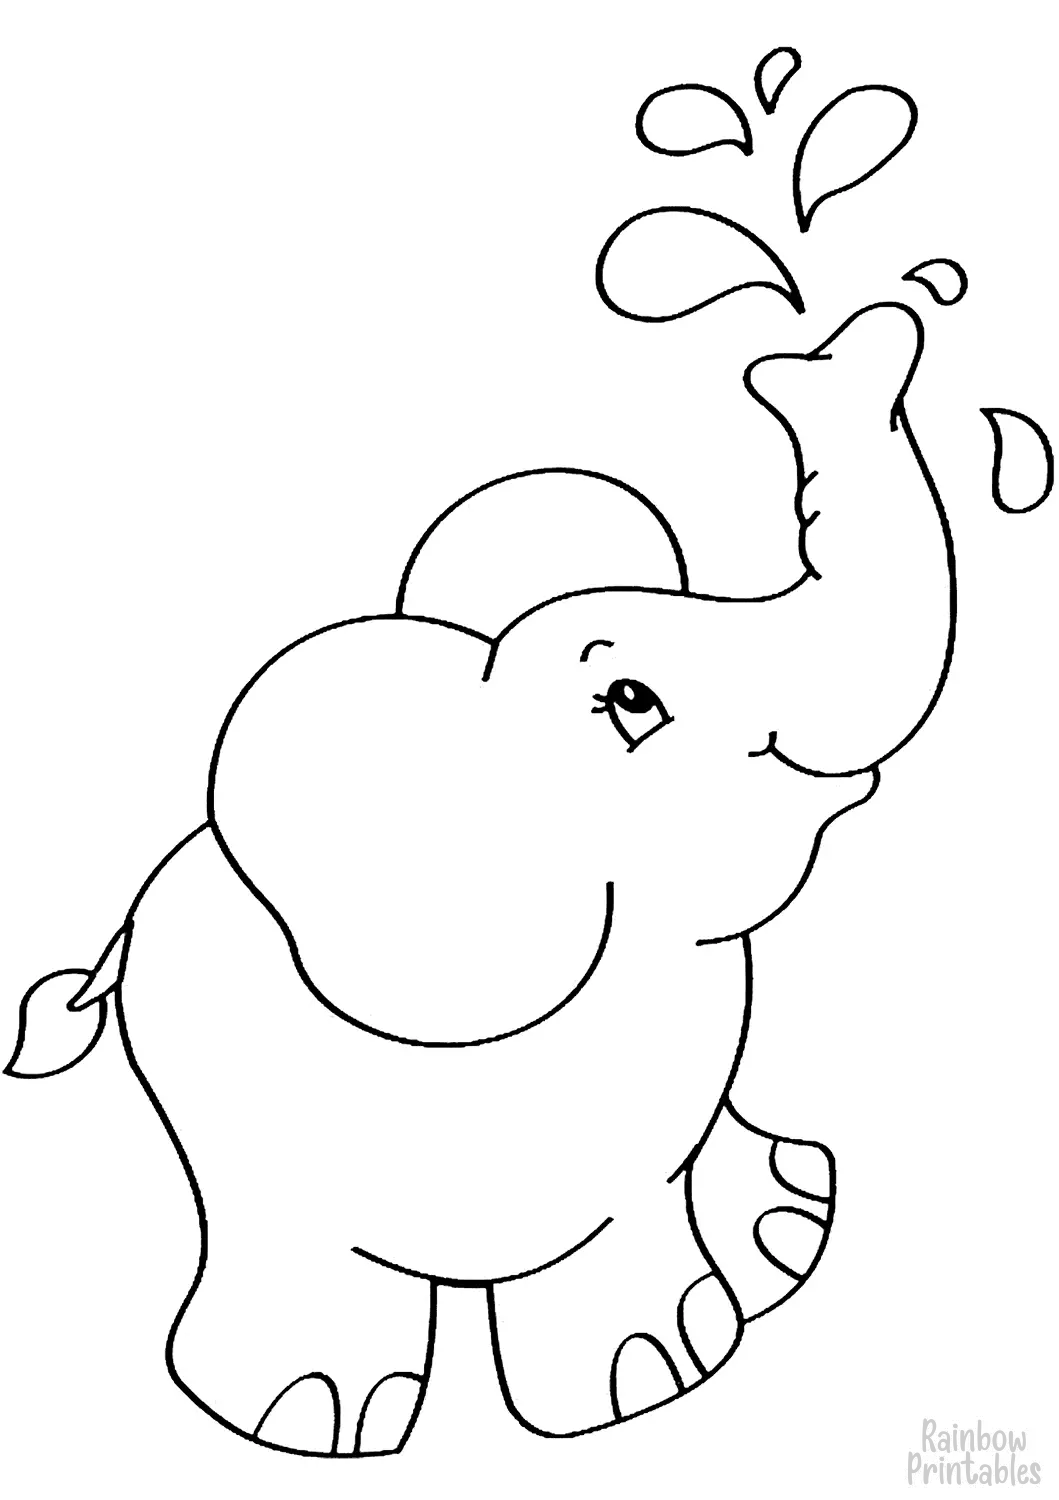 EASY SIMPLE for small children-cartoon-elephant-coloring-page